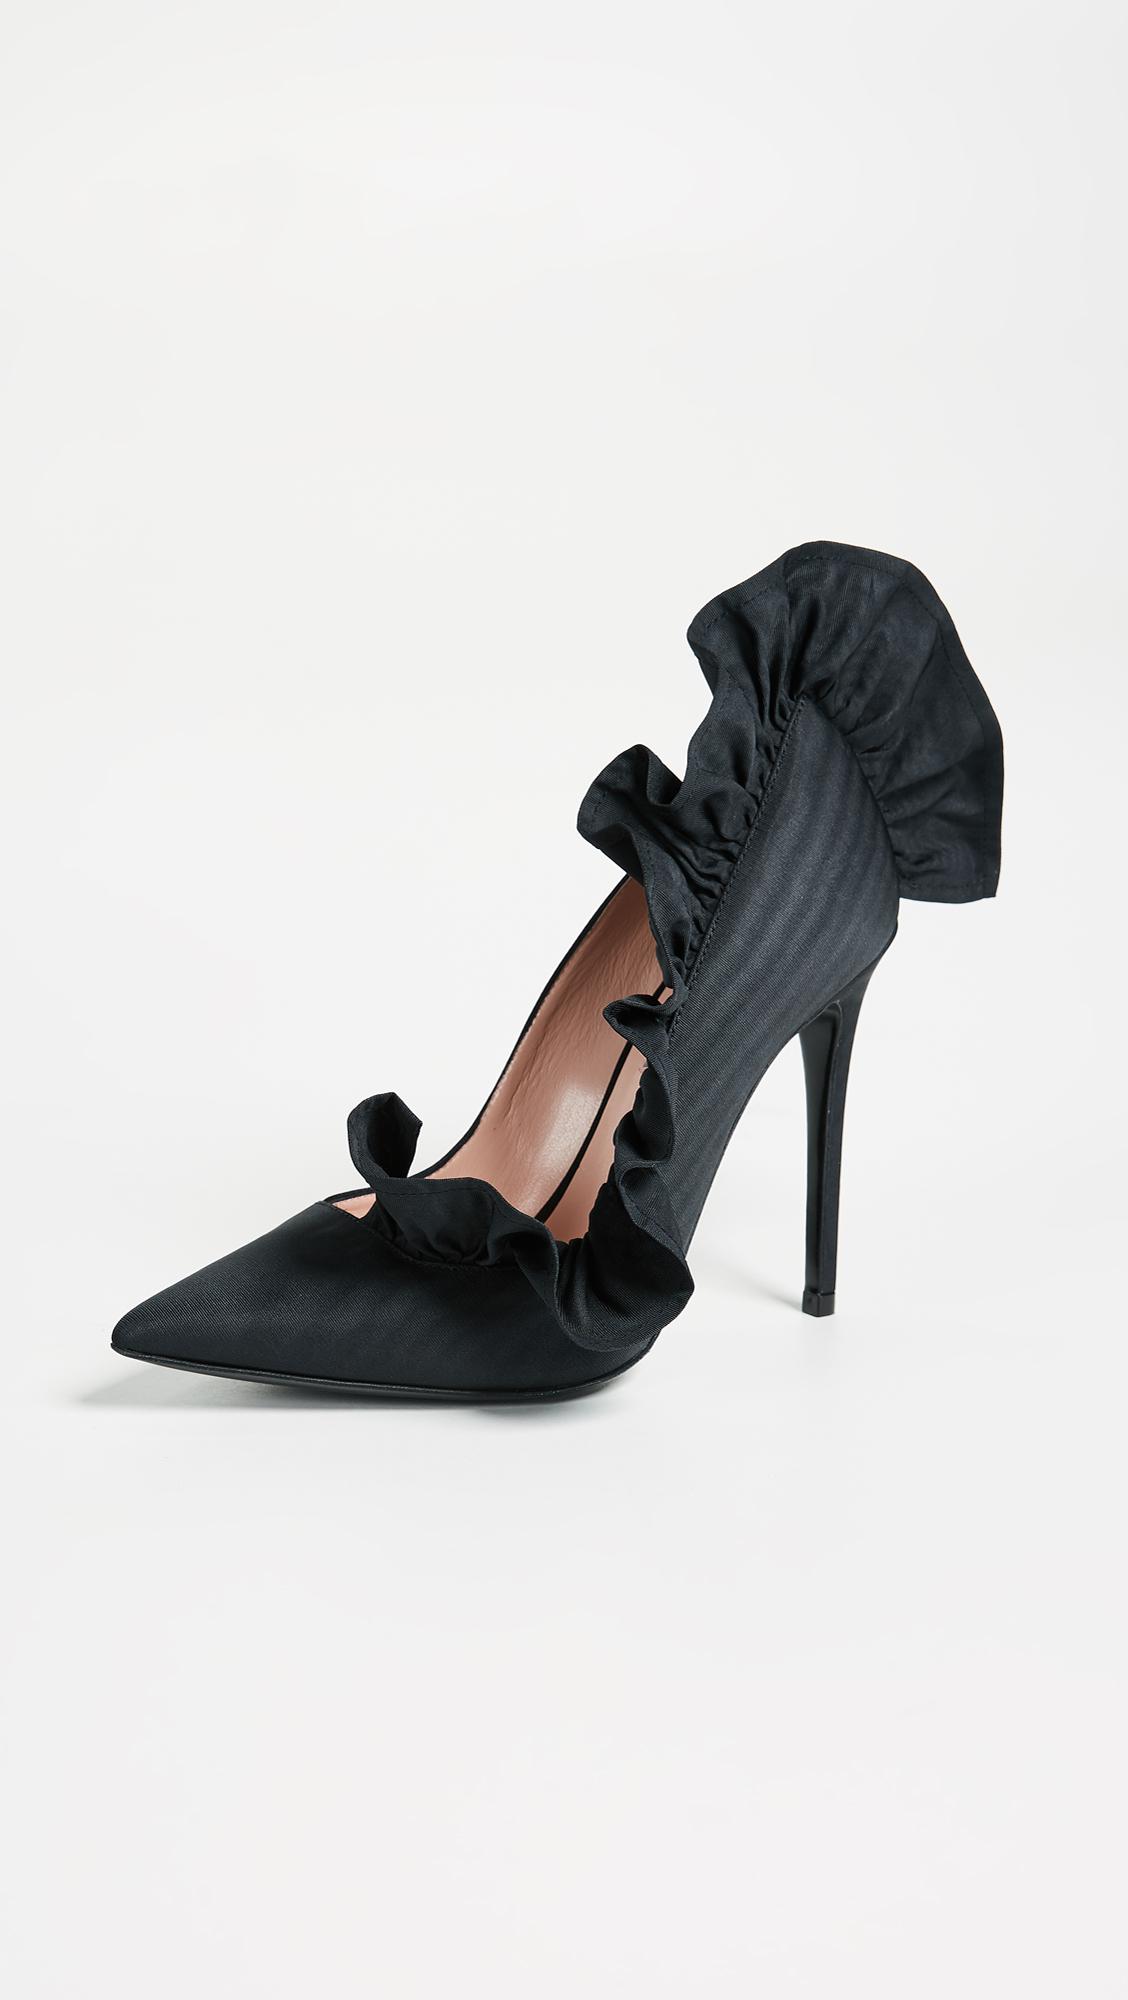 MSGM Leather Ruffle Pumps in Black - Lyst